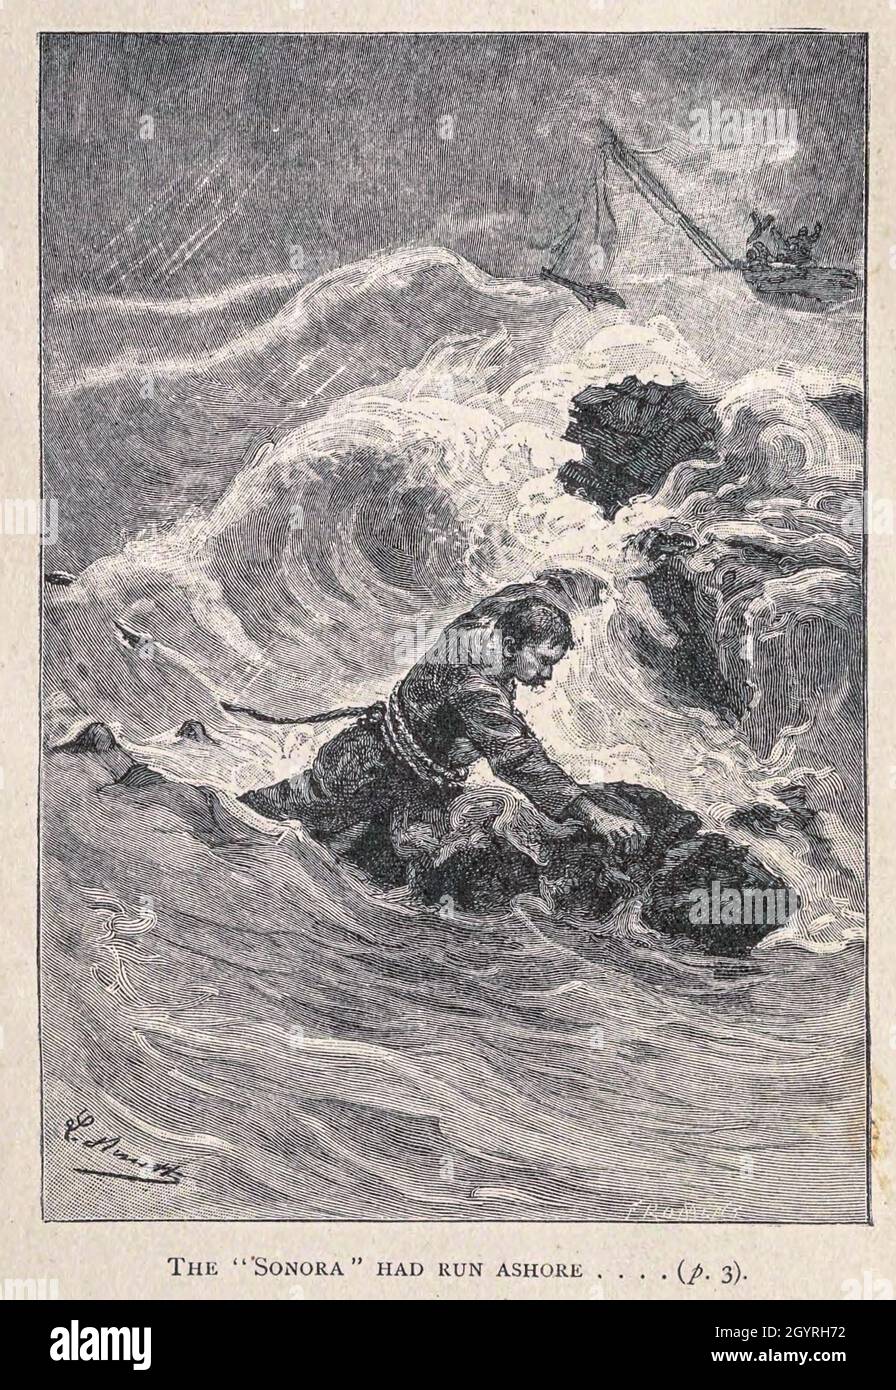 The Sonora had run ashore from the book ' Mistress Branican ' by Jules Verne, illustrated by Leon Benett. The story begins in the United States, where the heroine, Mistress Branican, suffers a mental breakdown after the death by drowning of her young son. On recovering, she learns that her husband, Captain Branican, has been reported lost at sea. Having acquired a fortune, she is able to launch an expedition to search for her husband, who she is convinced is still alive. She leads the expedition herself and trail leads her into the Australian hinterland. Mistress Branican (French: Mistress Bra Stock Photo